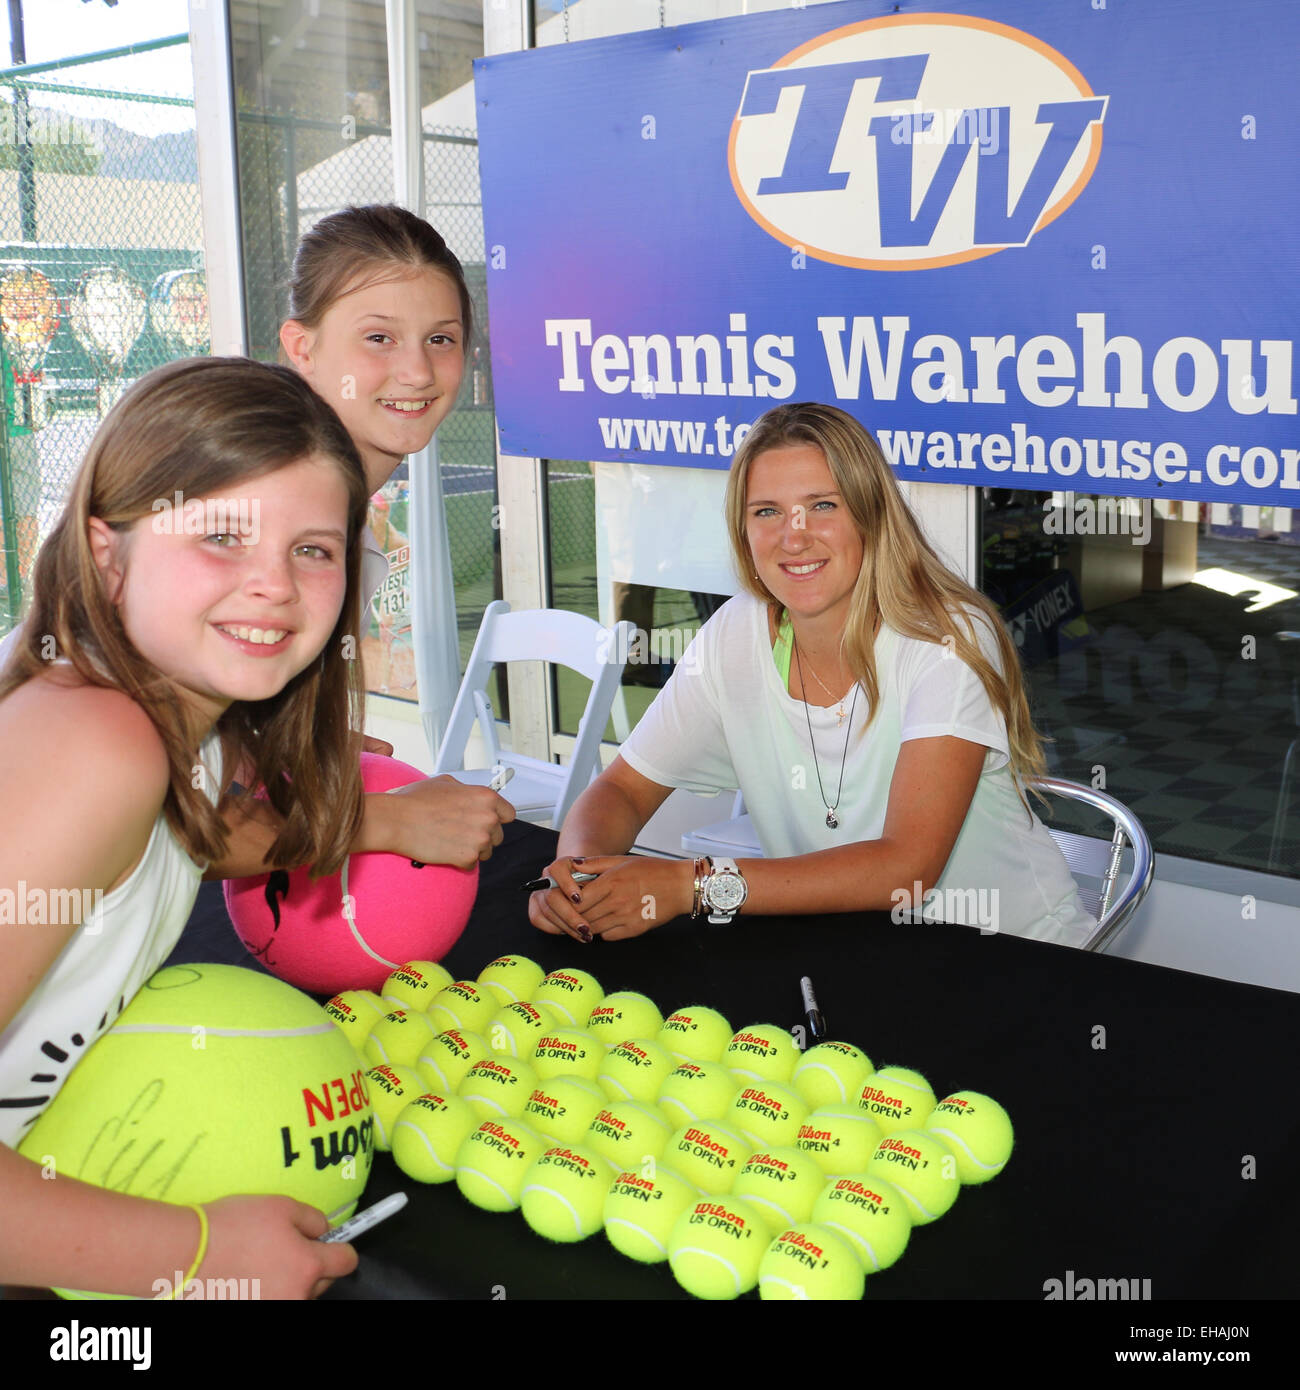 Indian Wells, California 10th March, 2015 Tennis player Victoria Azarenka from Belarus signs autographs for Lane Harding (age 11) and Elise Williamson (age 11) both from Richmond, Virginia at the BNP Paribas Open. Credit: Lisa Werner/Alamy Live News Stock Photo